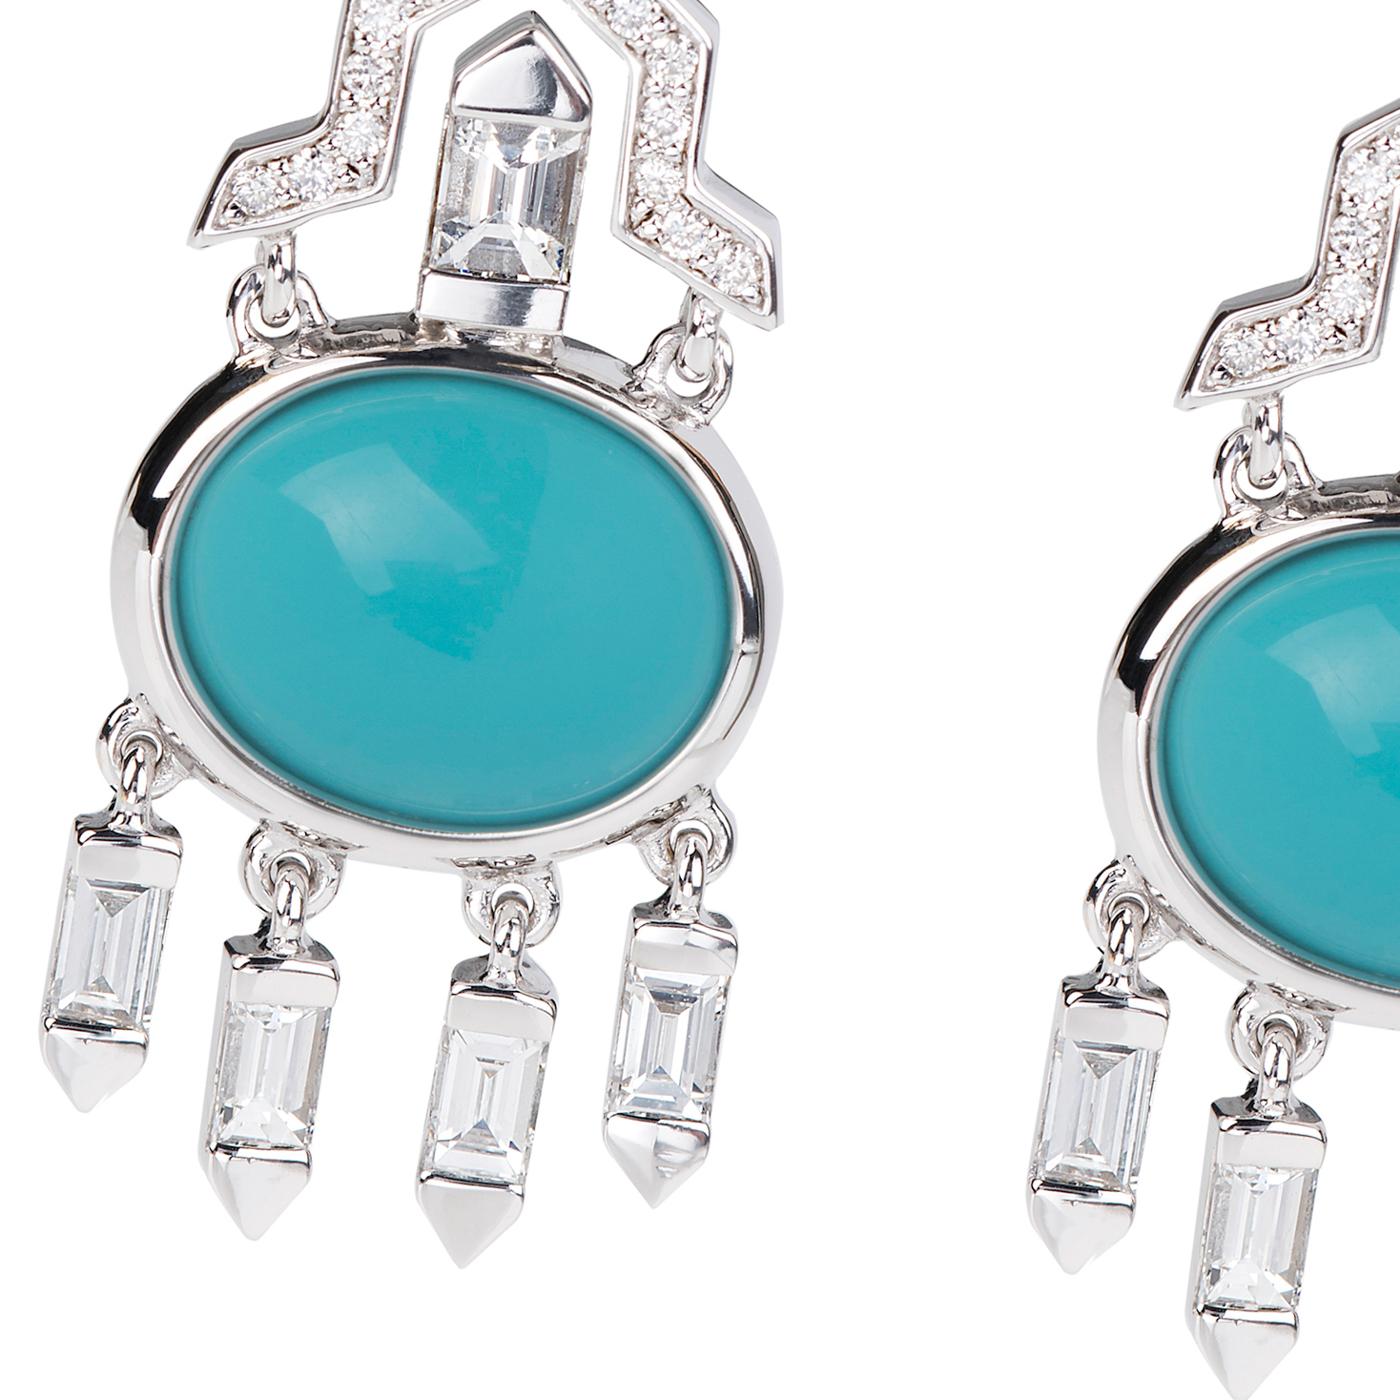 Nikos Koulis Oui collection 18K white gold earrings with 6.24 cts turquoises and 1.43 cts white diamonds